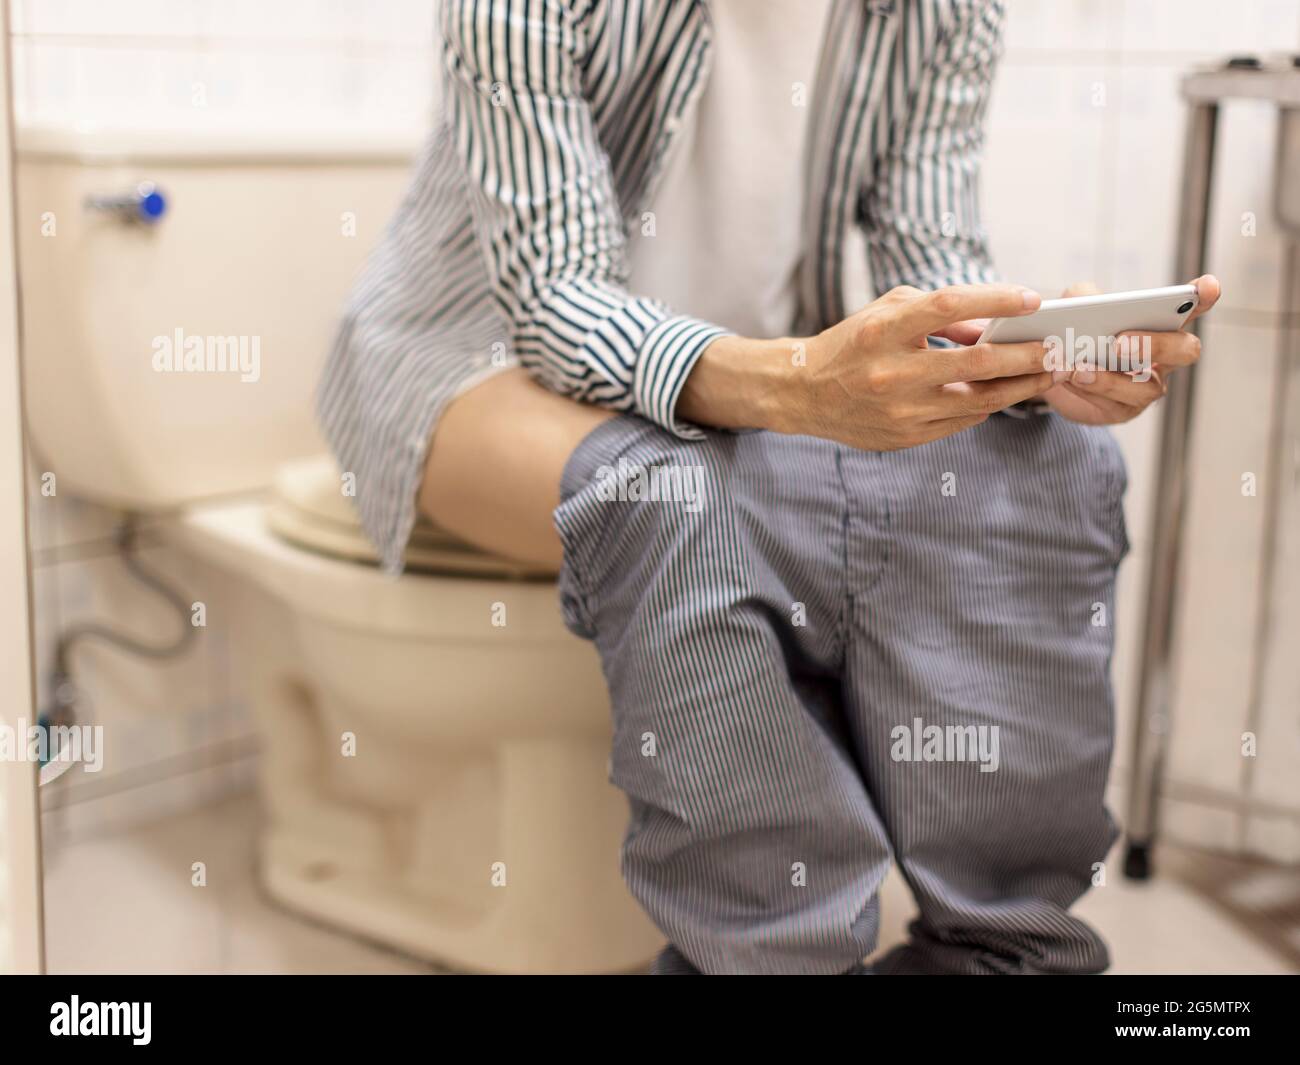 man has diarrhea in the toilet, using mobile phone horizontally to play mobile games/watch videos on the mobile phone Stock Photo